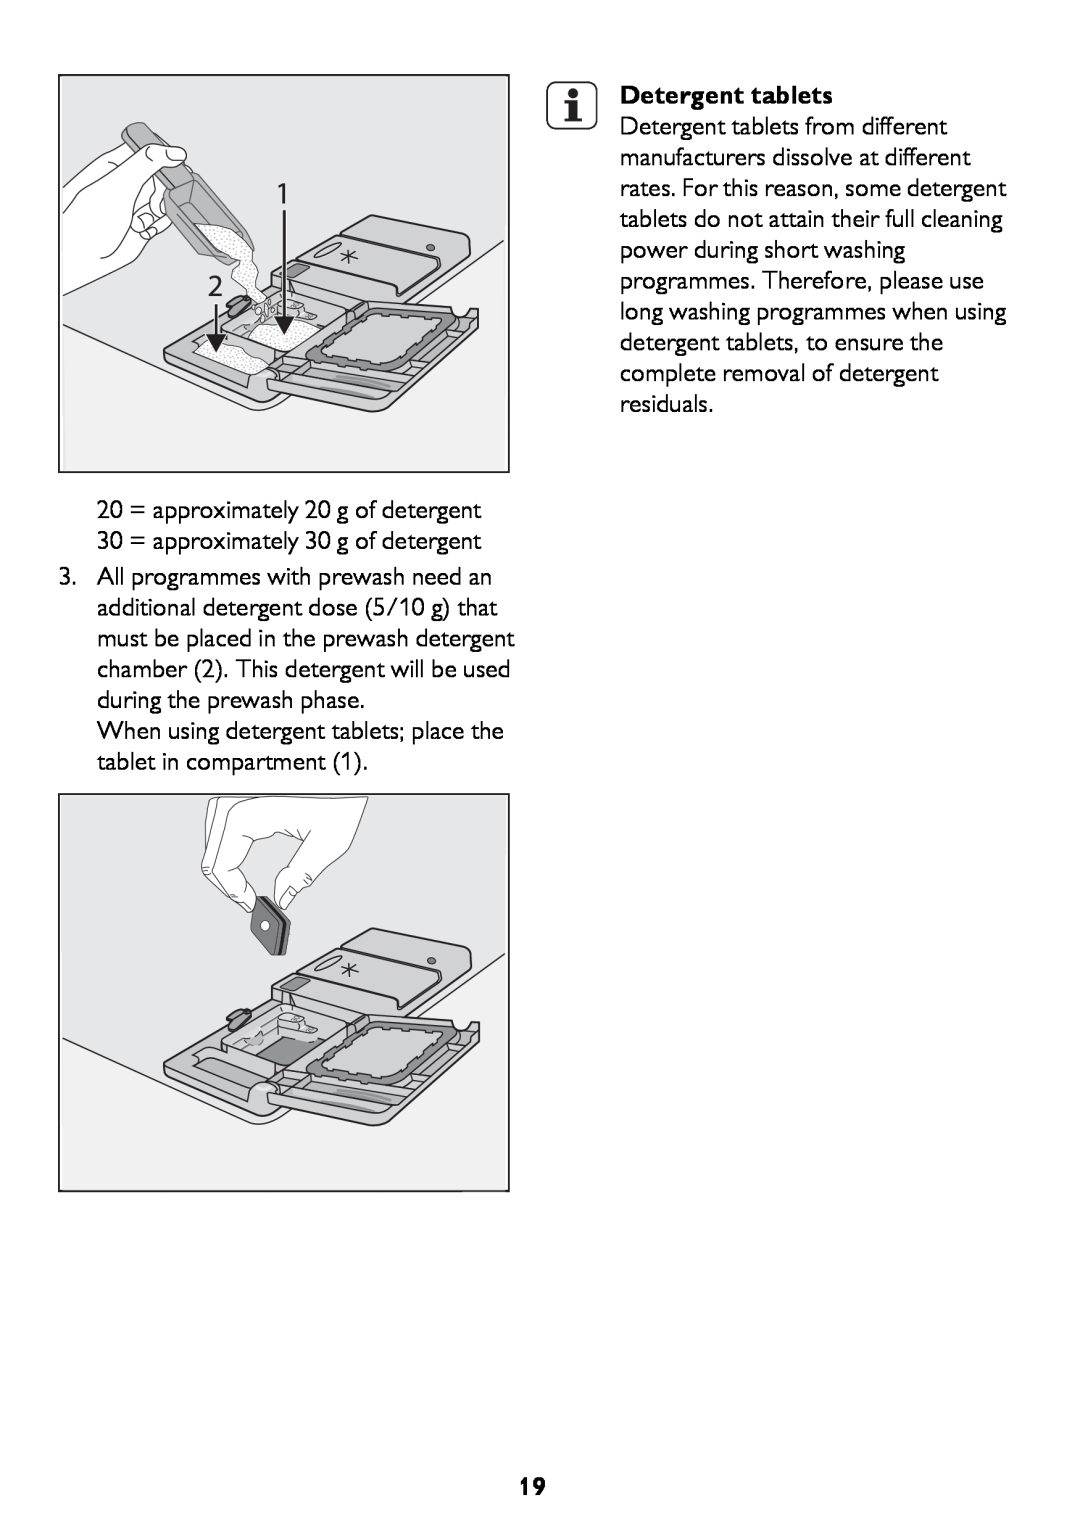 John Lewis JLDWW 906 instruction manual When using detergent tablets place the tablet in compartment 